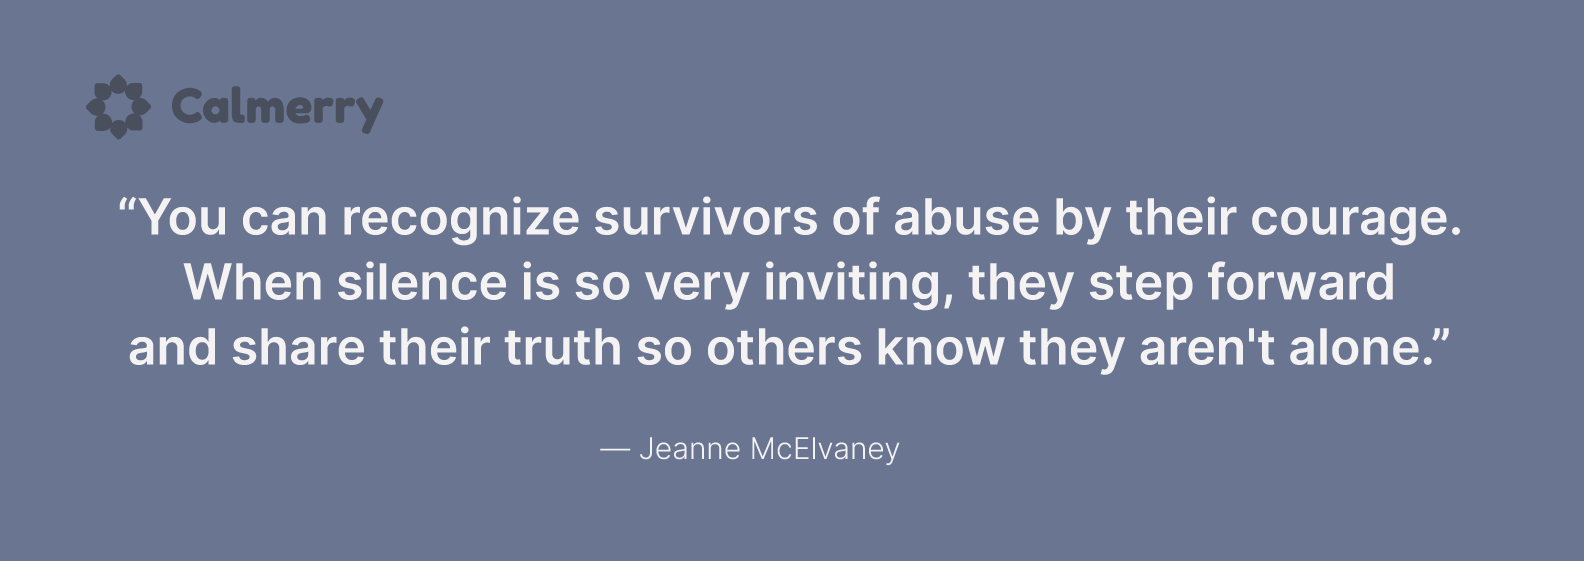 Jeanne McElvaney quote